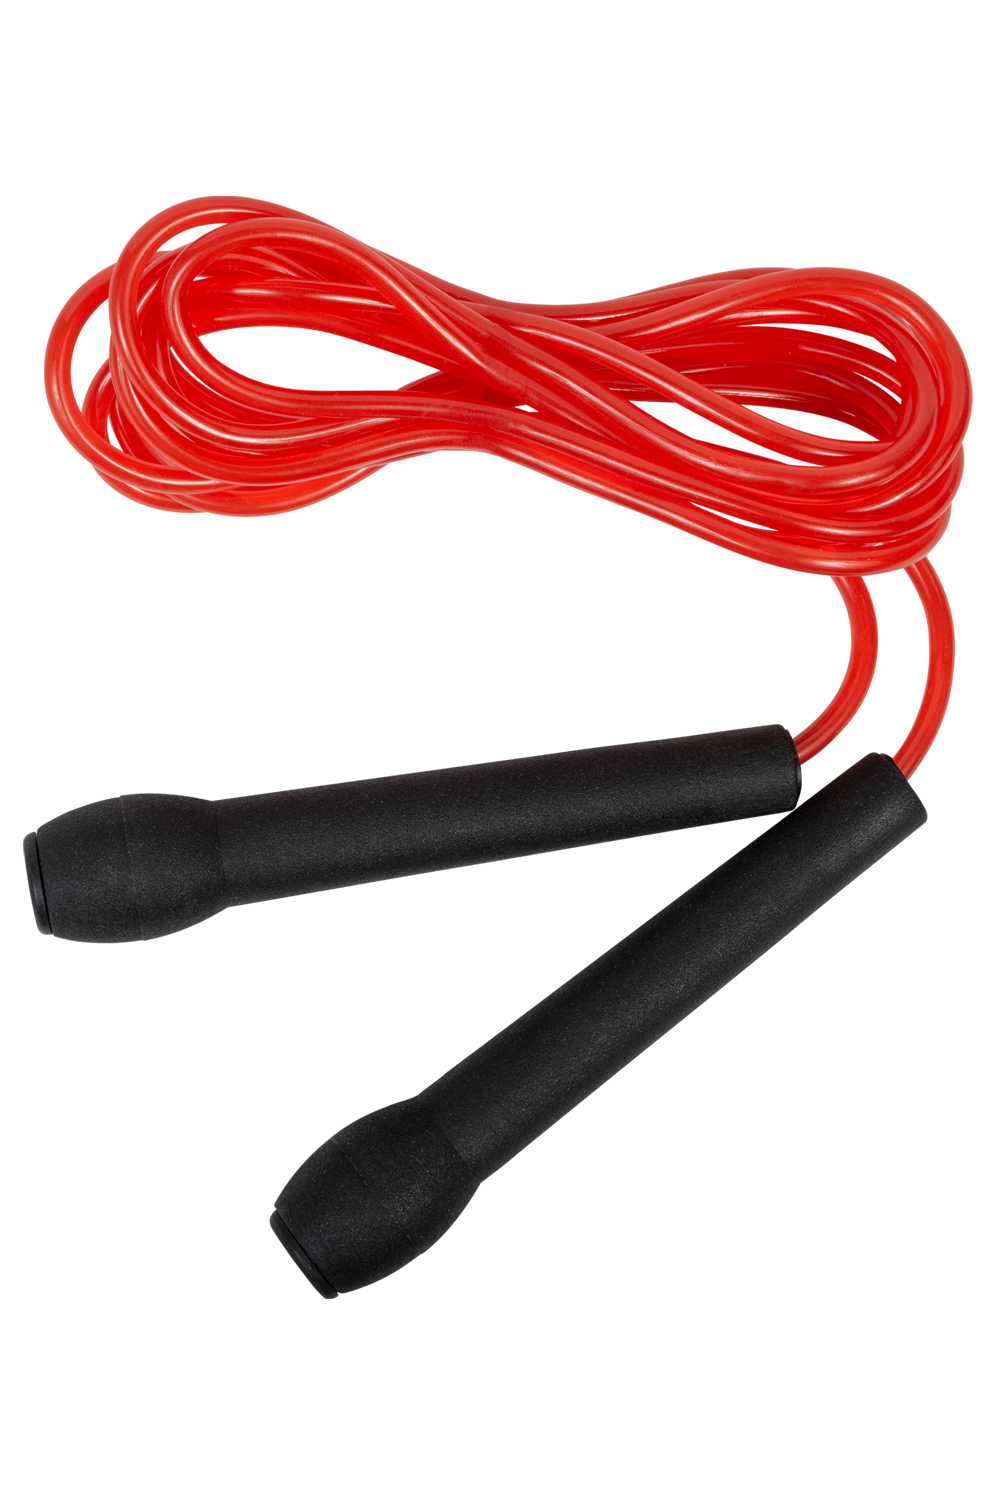 Lonsdale Skipping Rope 2,7m